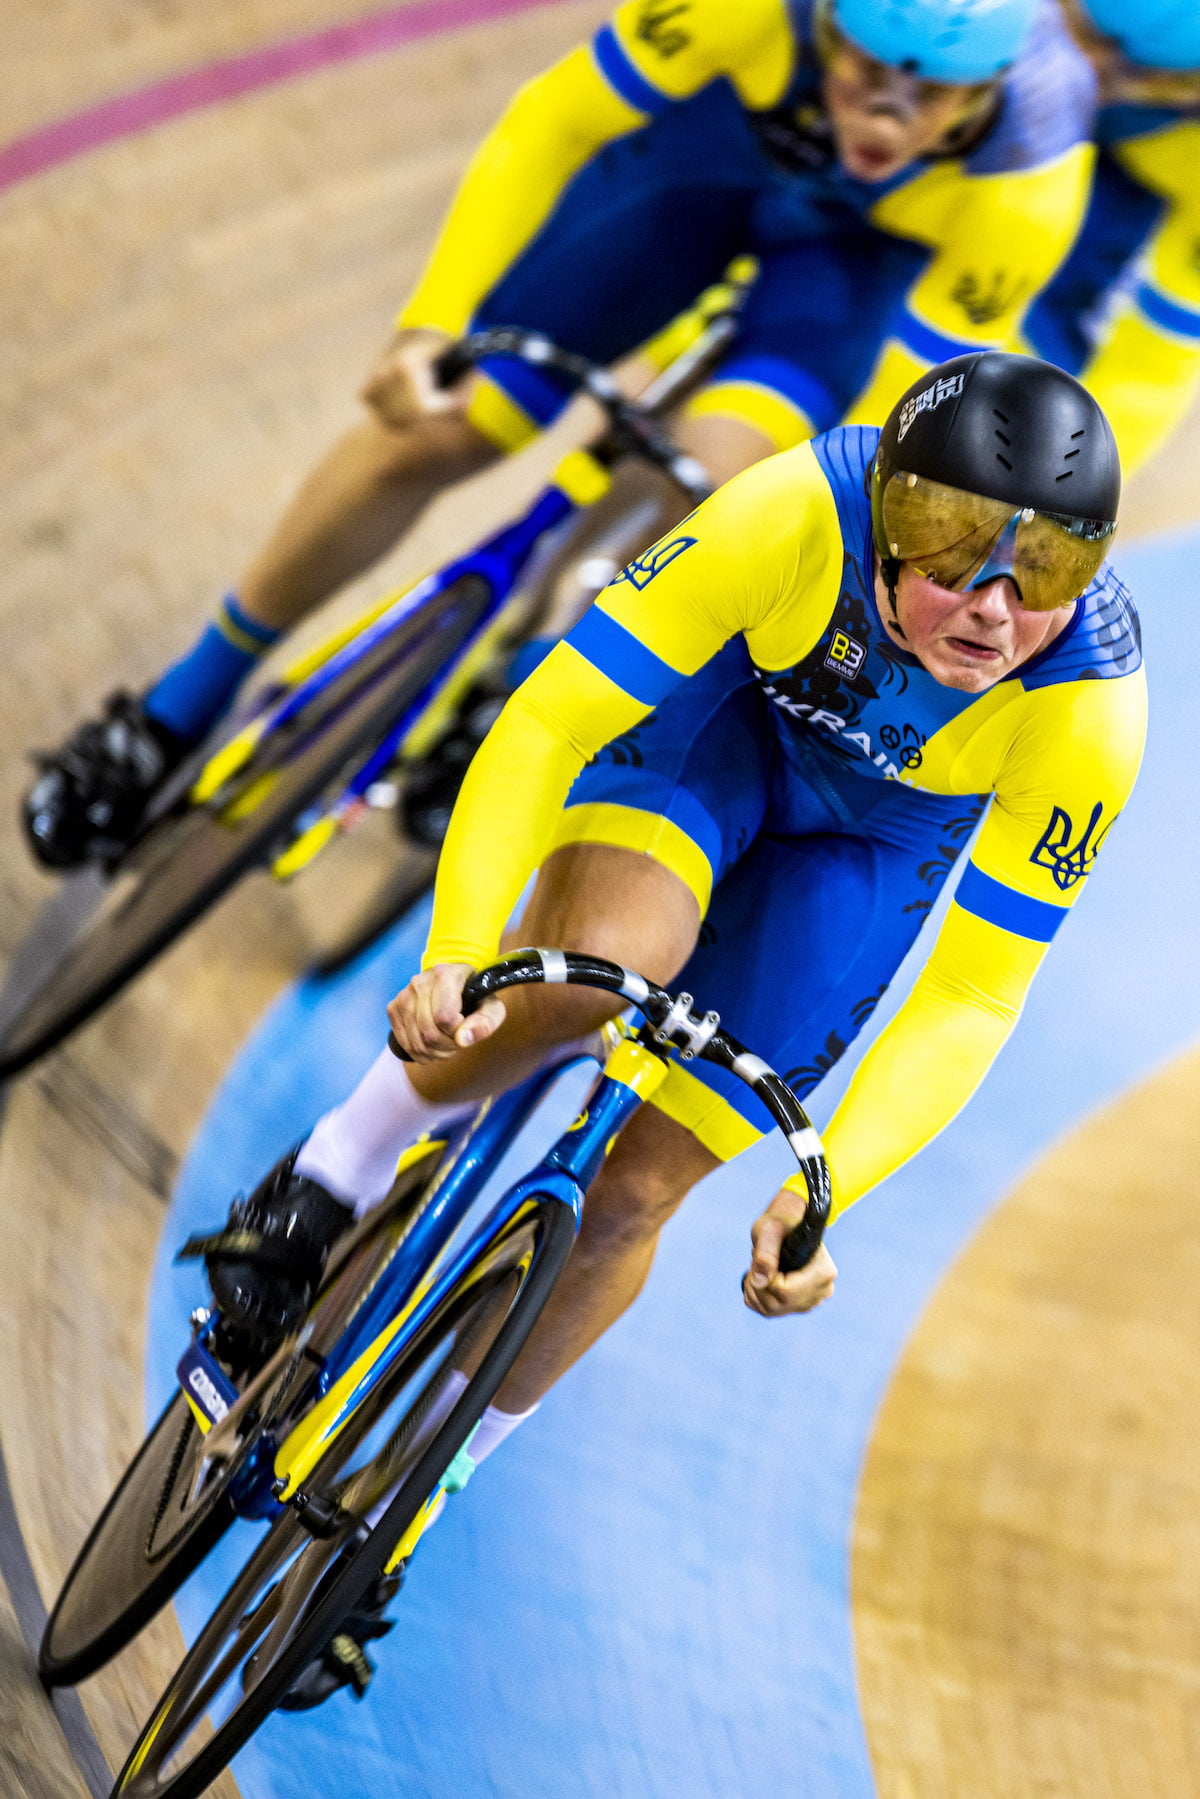 uci-track-cycling-nations-cup-15-may-2021-bc-magazine